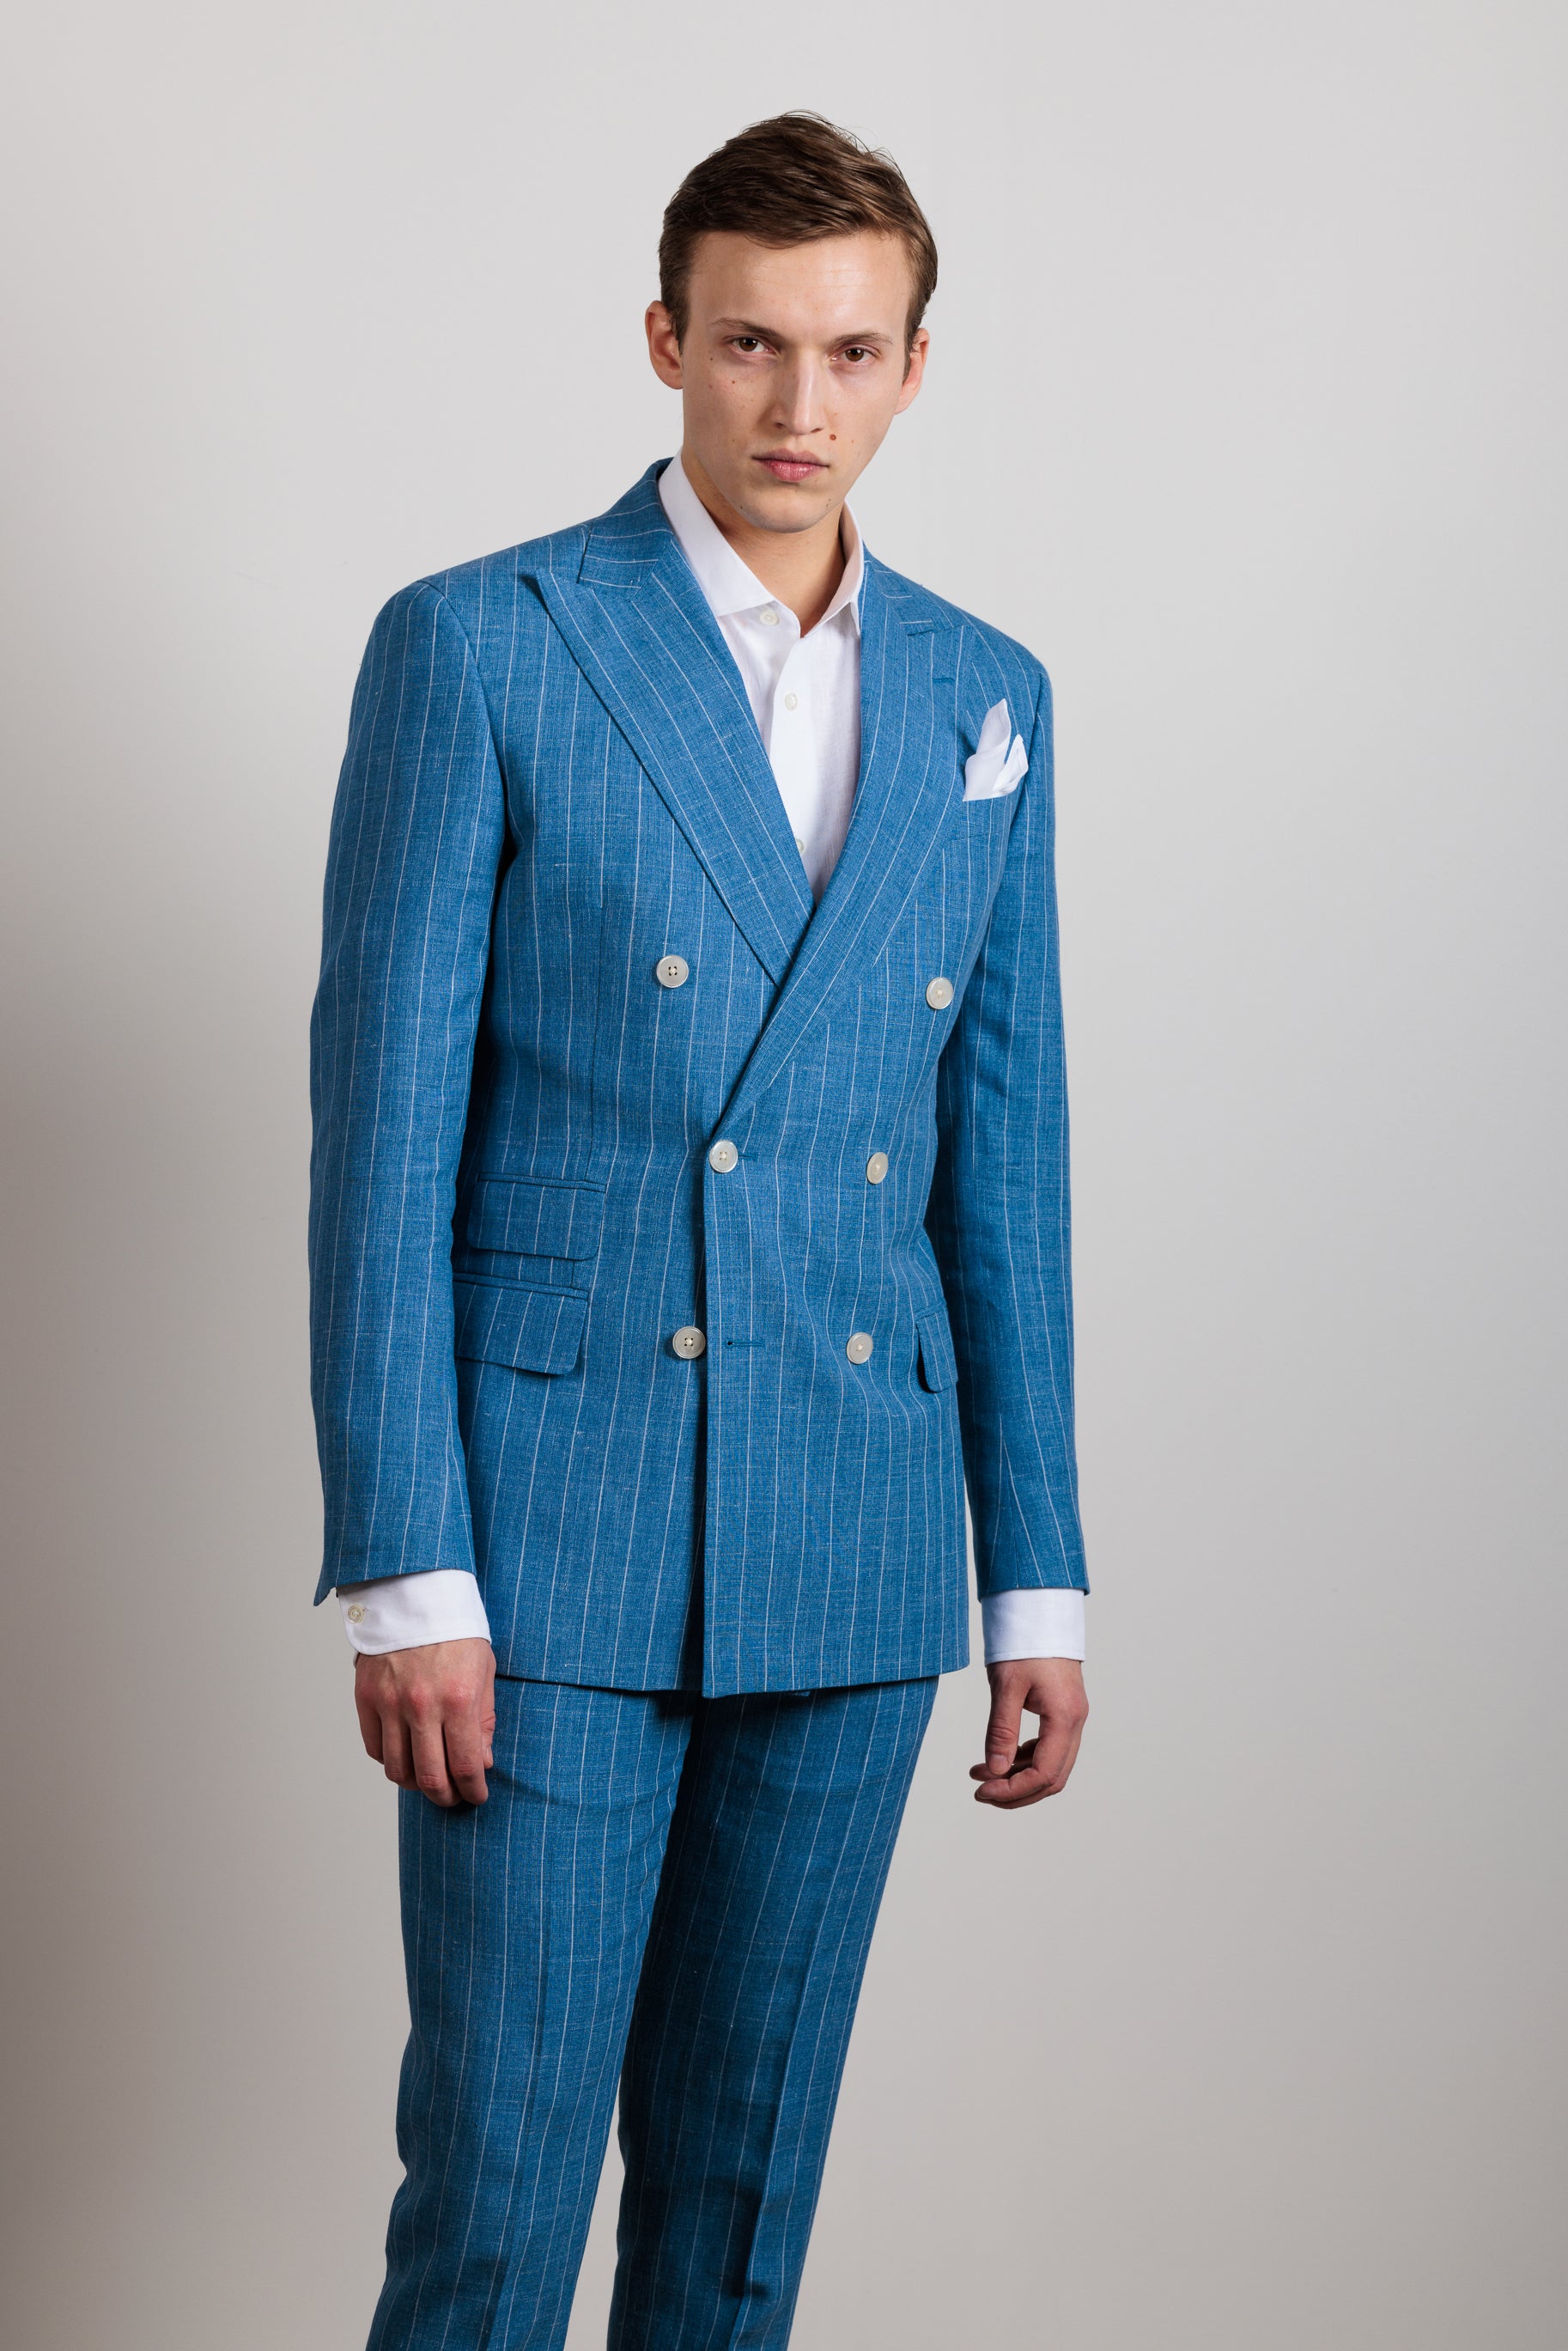 Double Breasted Suit "CITY" / Superfine Wool, Linen & Silk by Loro Piana